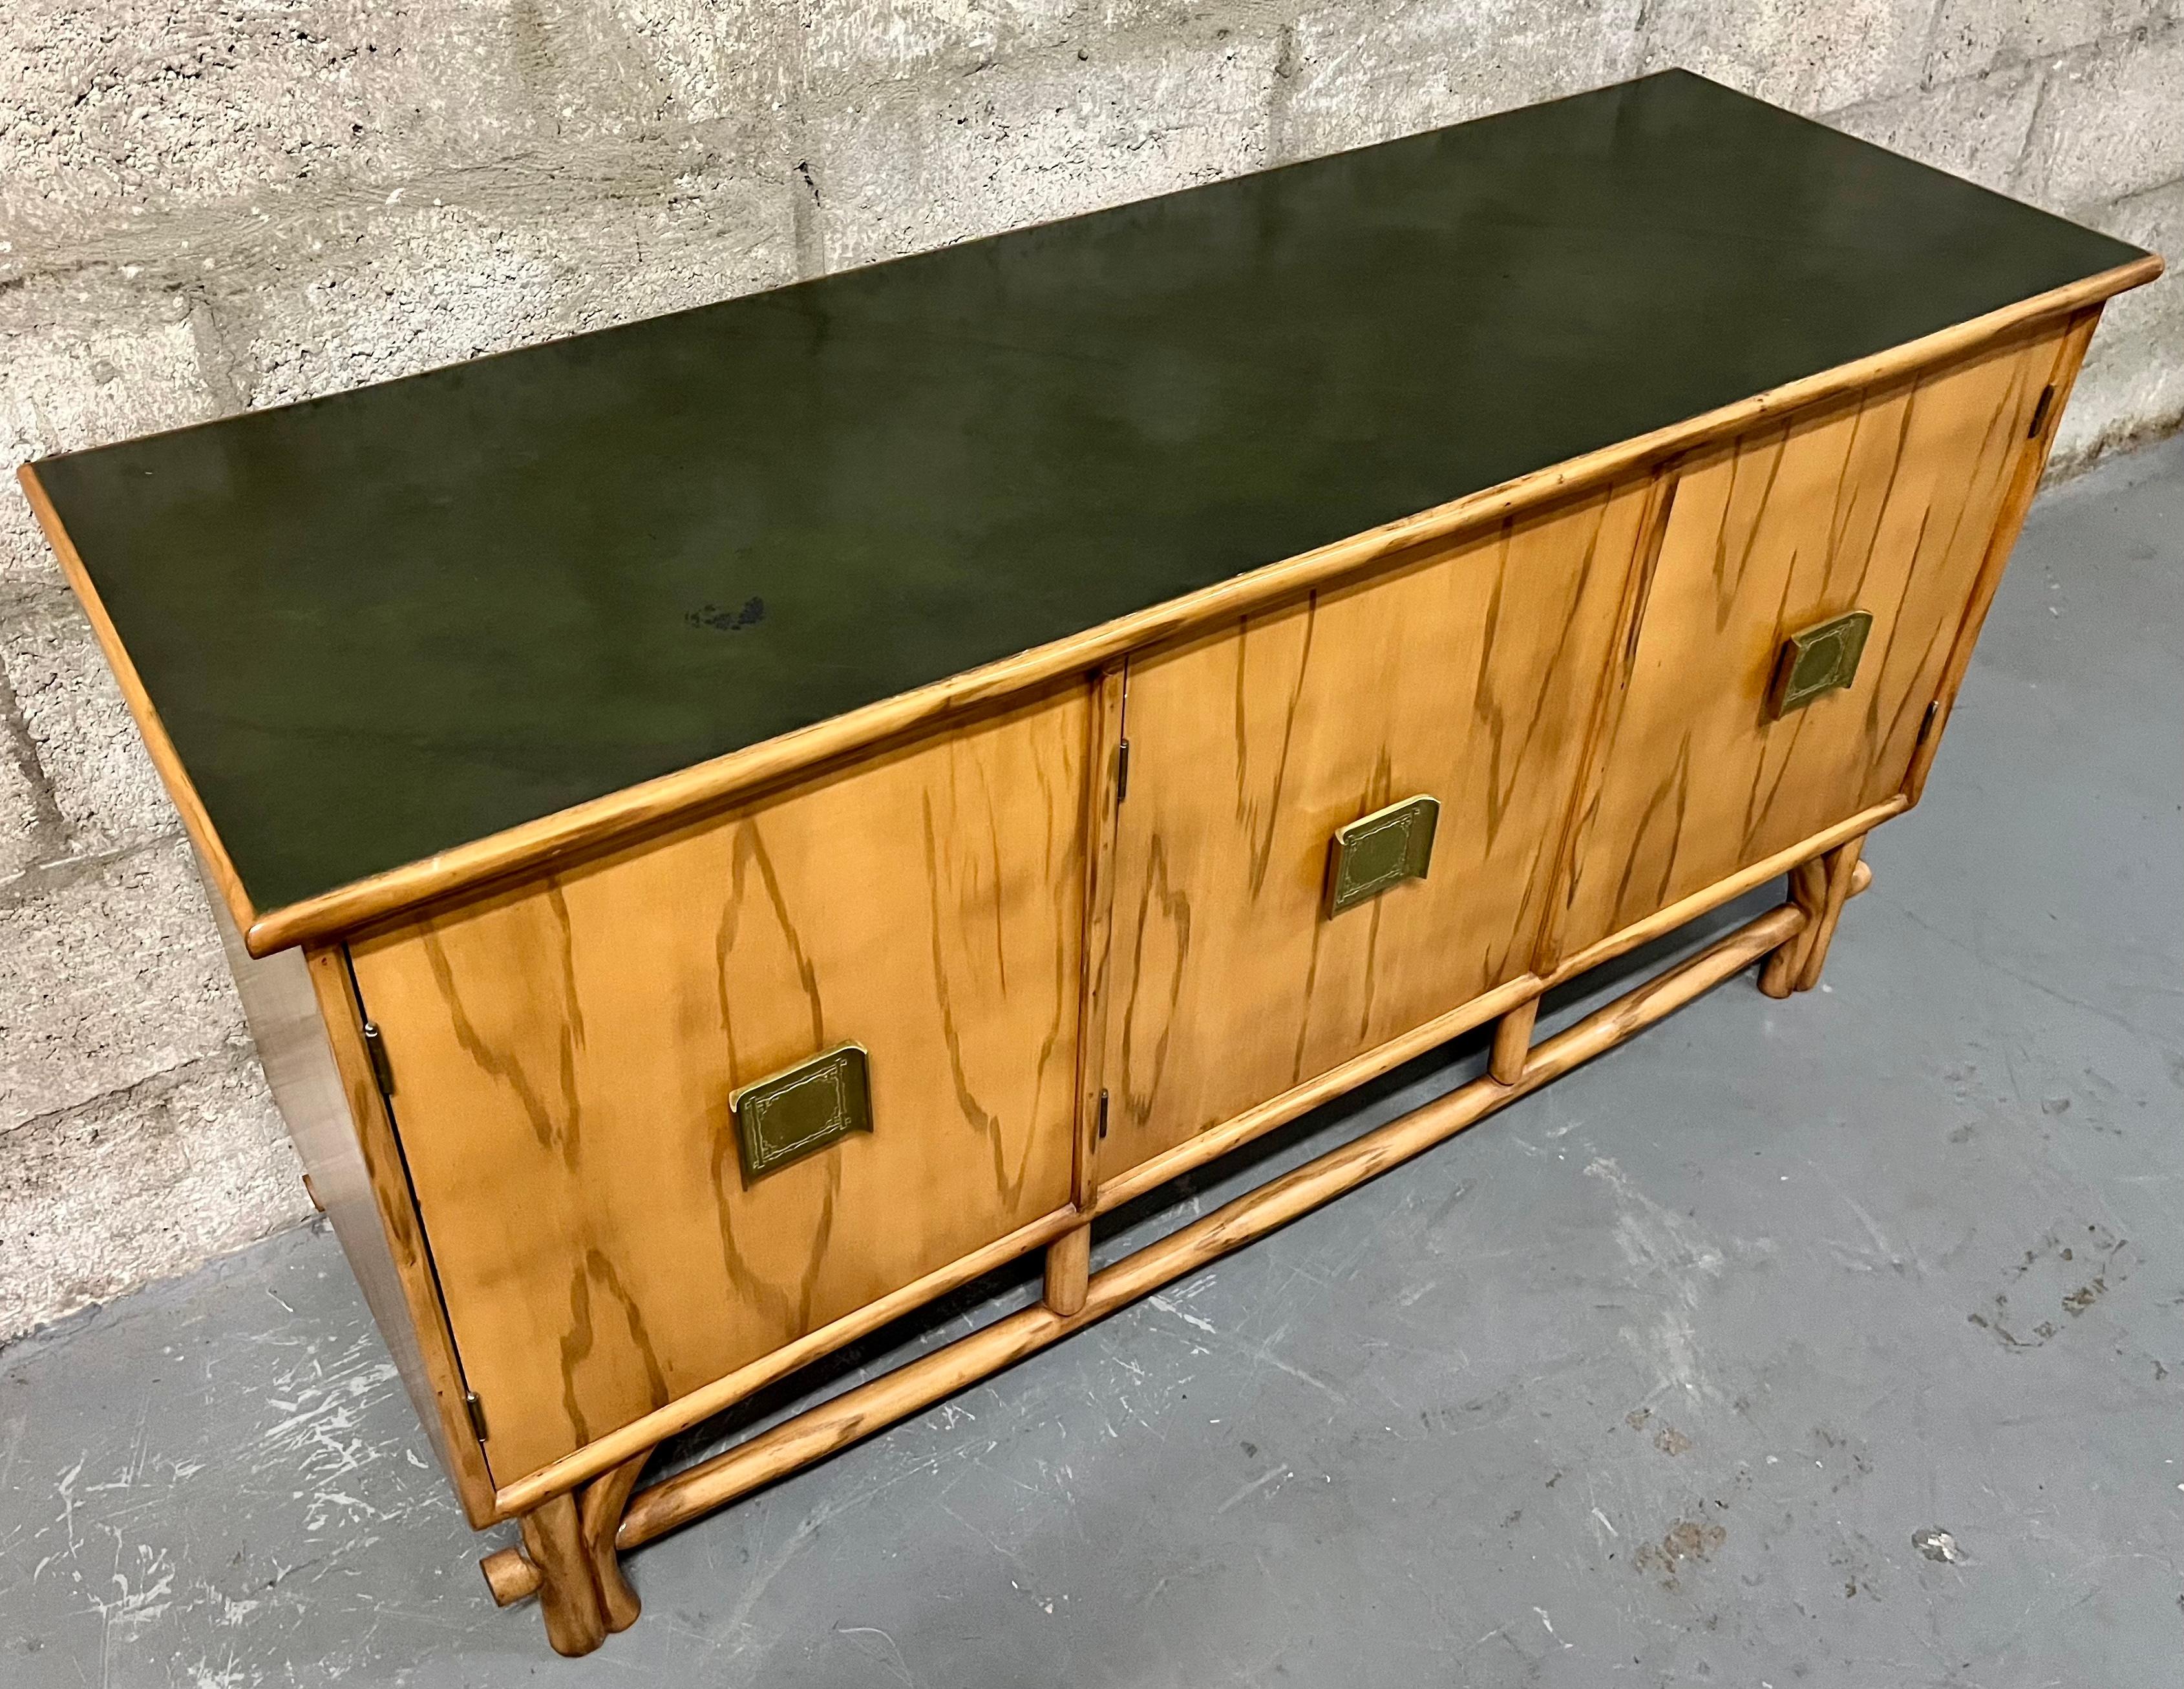 1960s Chinoiserie Inspired Sideboard in the Adrien Audoux & Frida Minet Style For Sale 2